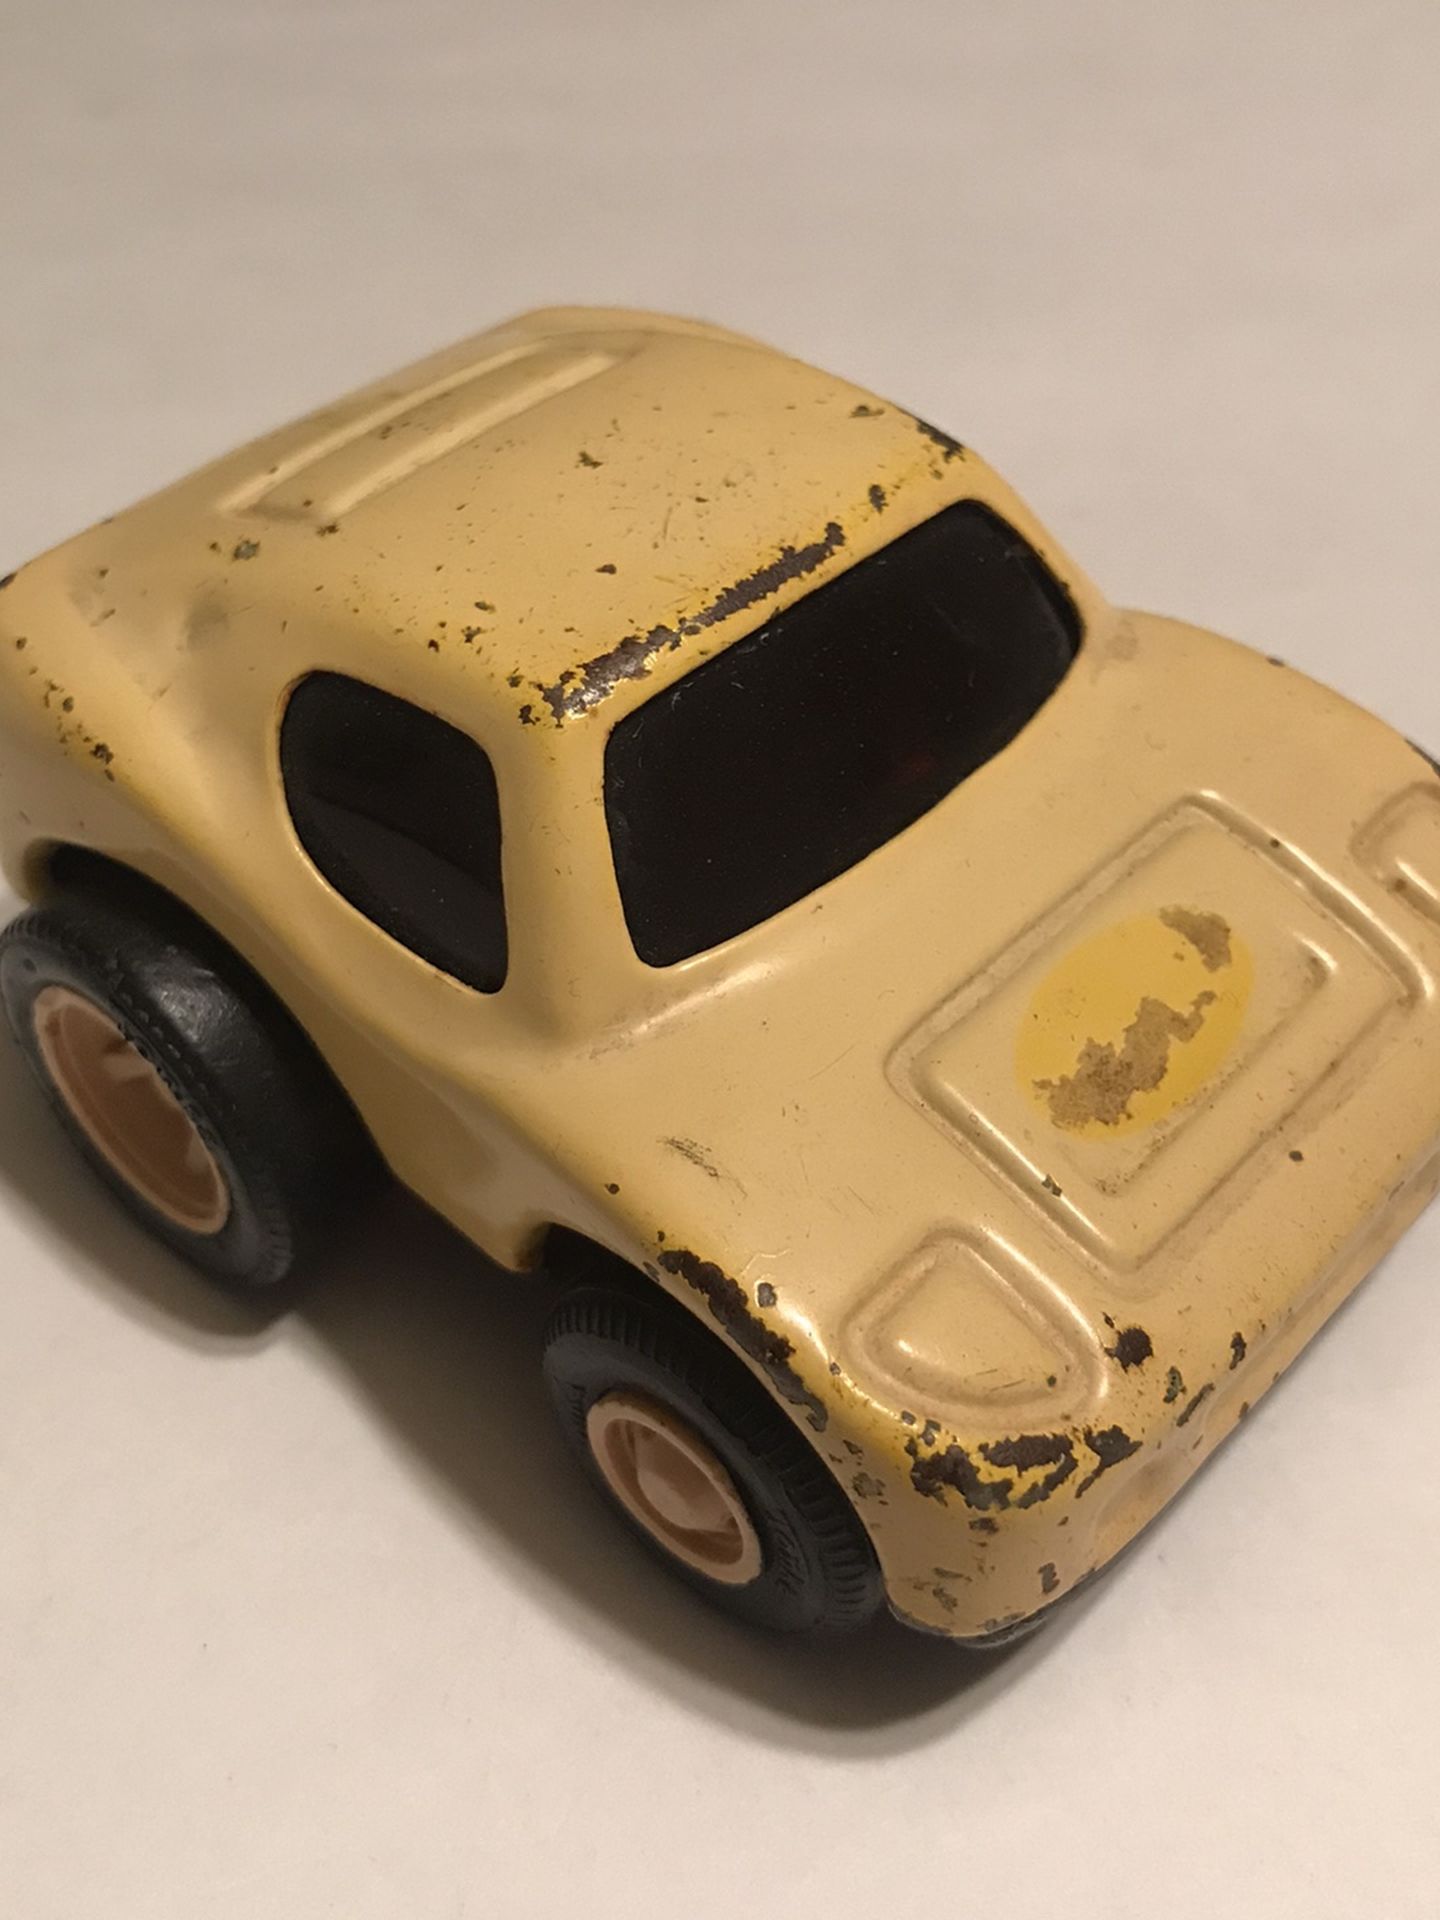 Vintage Tonka Made in Japan Diecast Metal Off Yellow Dune Buggy Toy Car